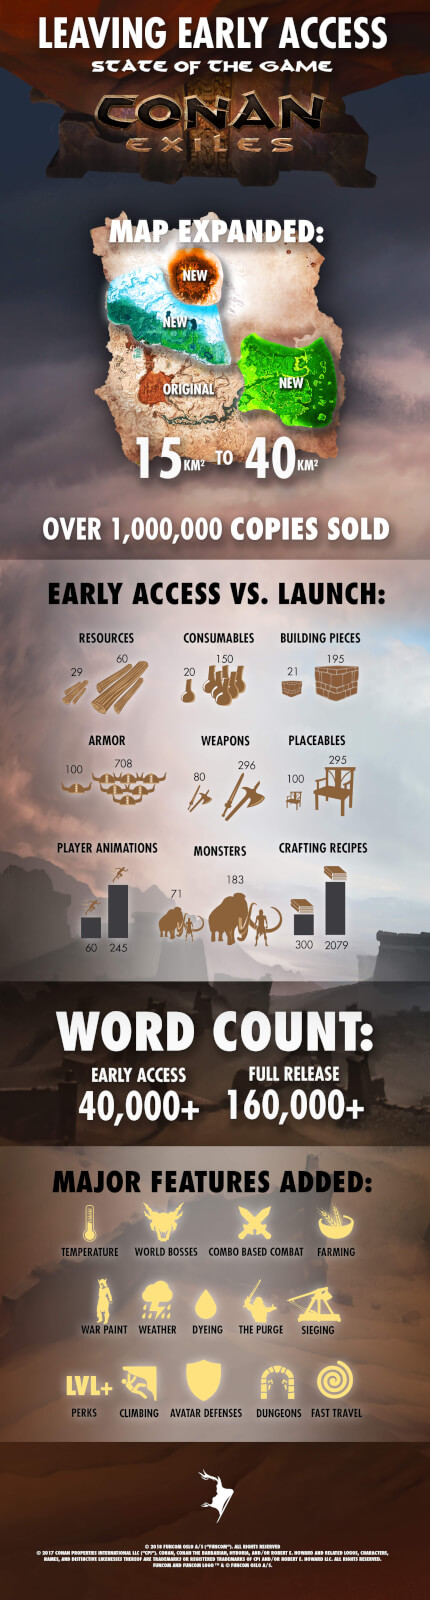 infographic_launch4 (1)